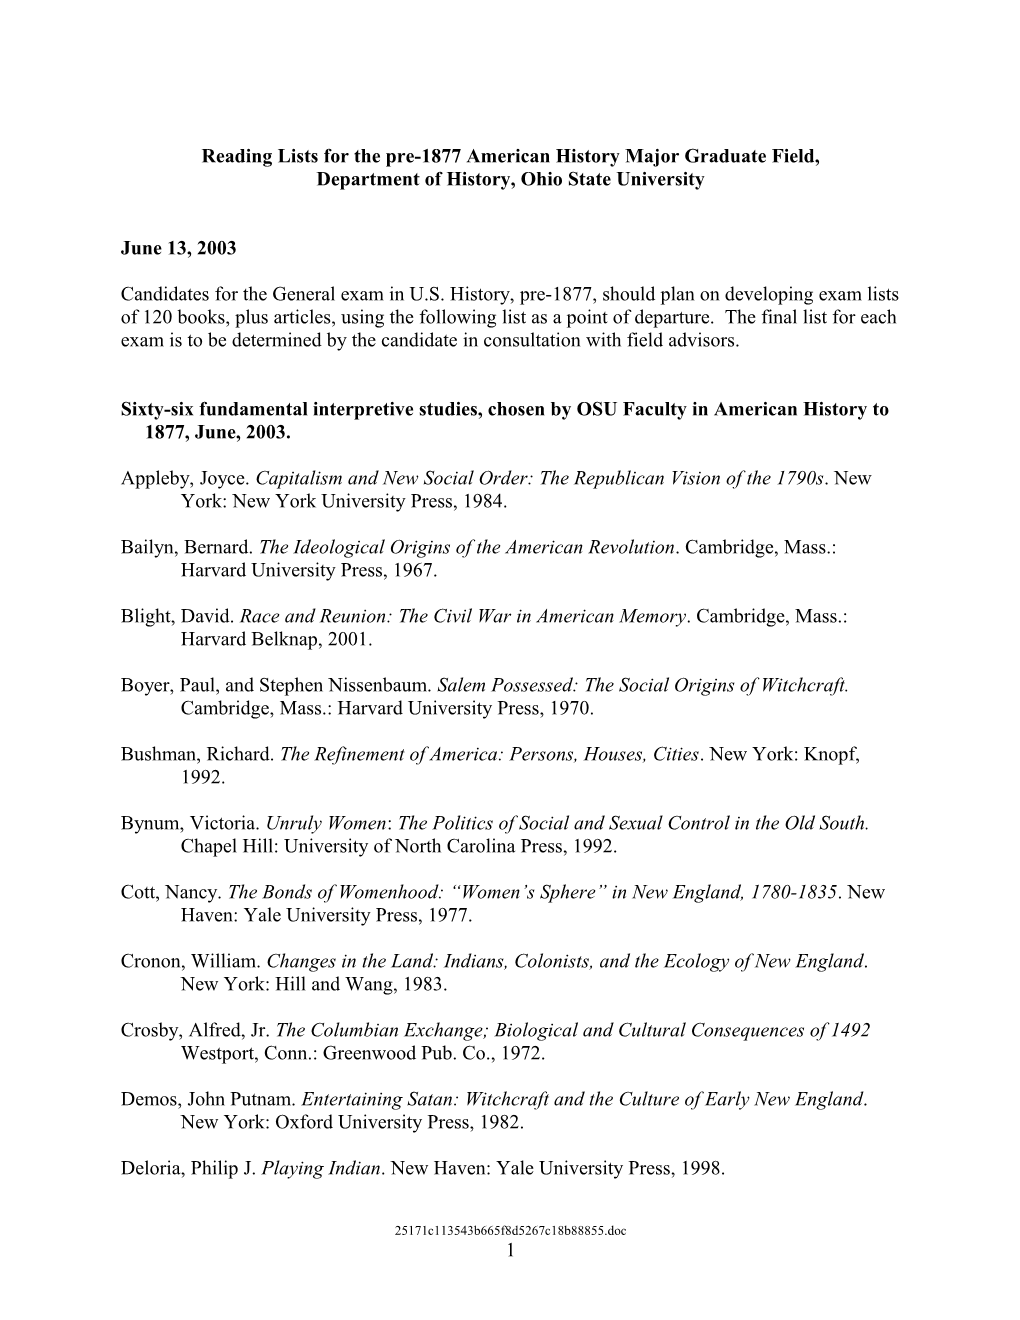 Reading Lists for the Pre-1877 American History Major Graduate Field